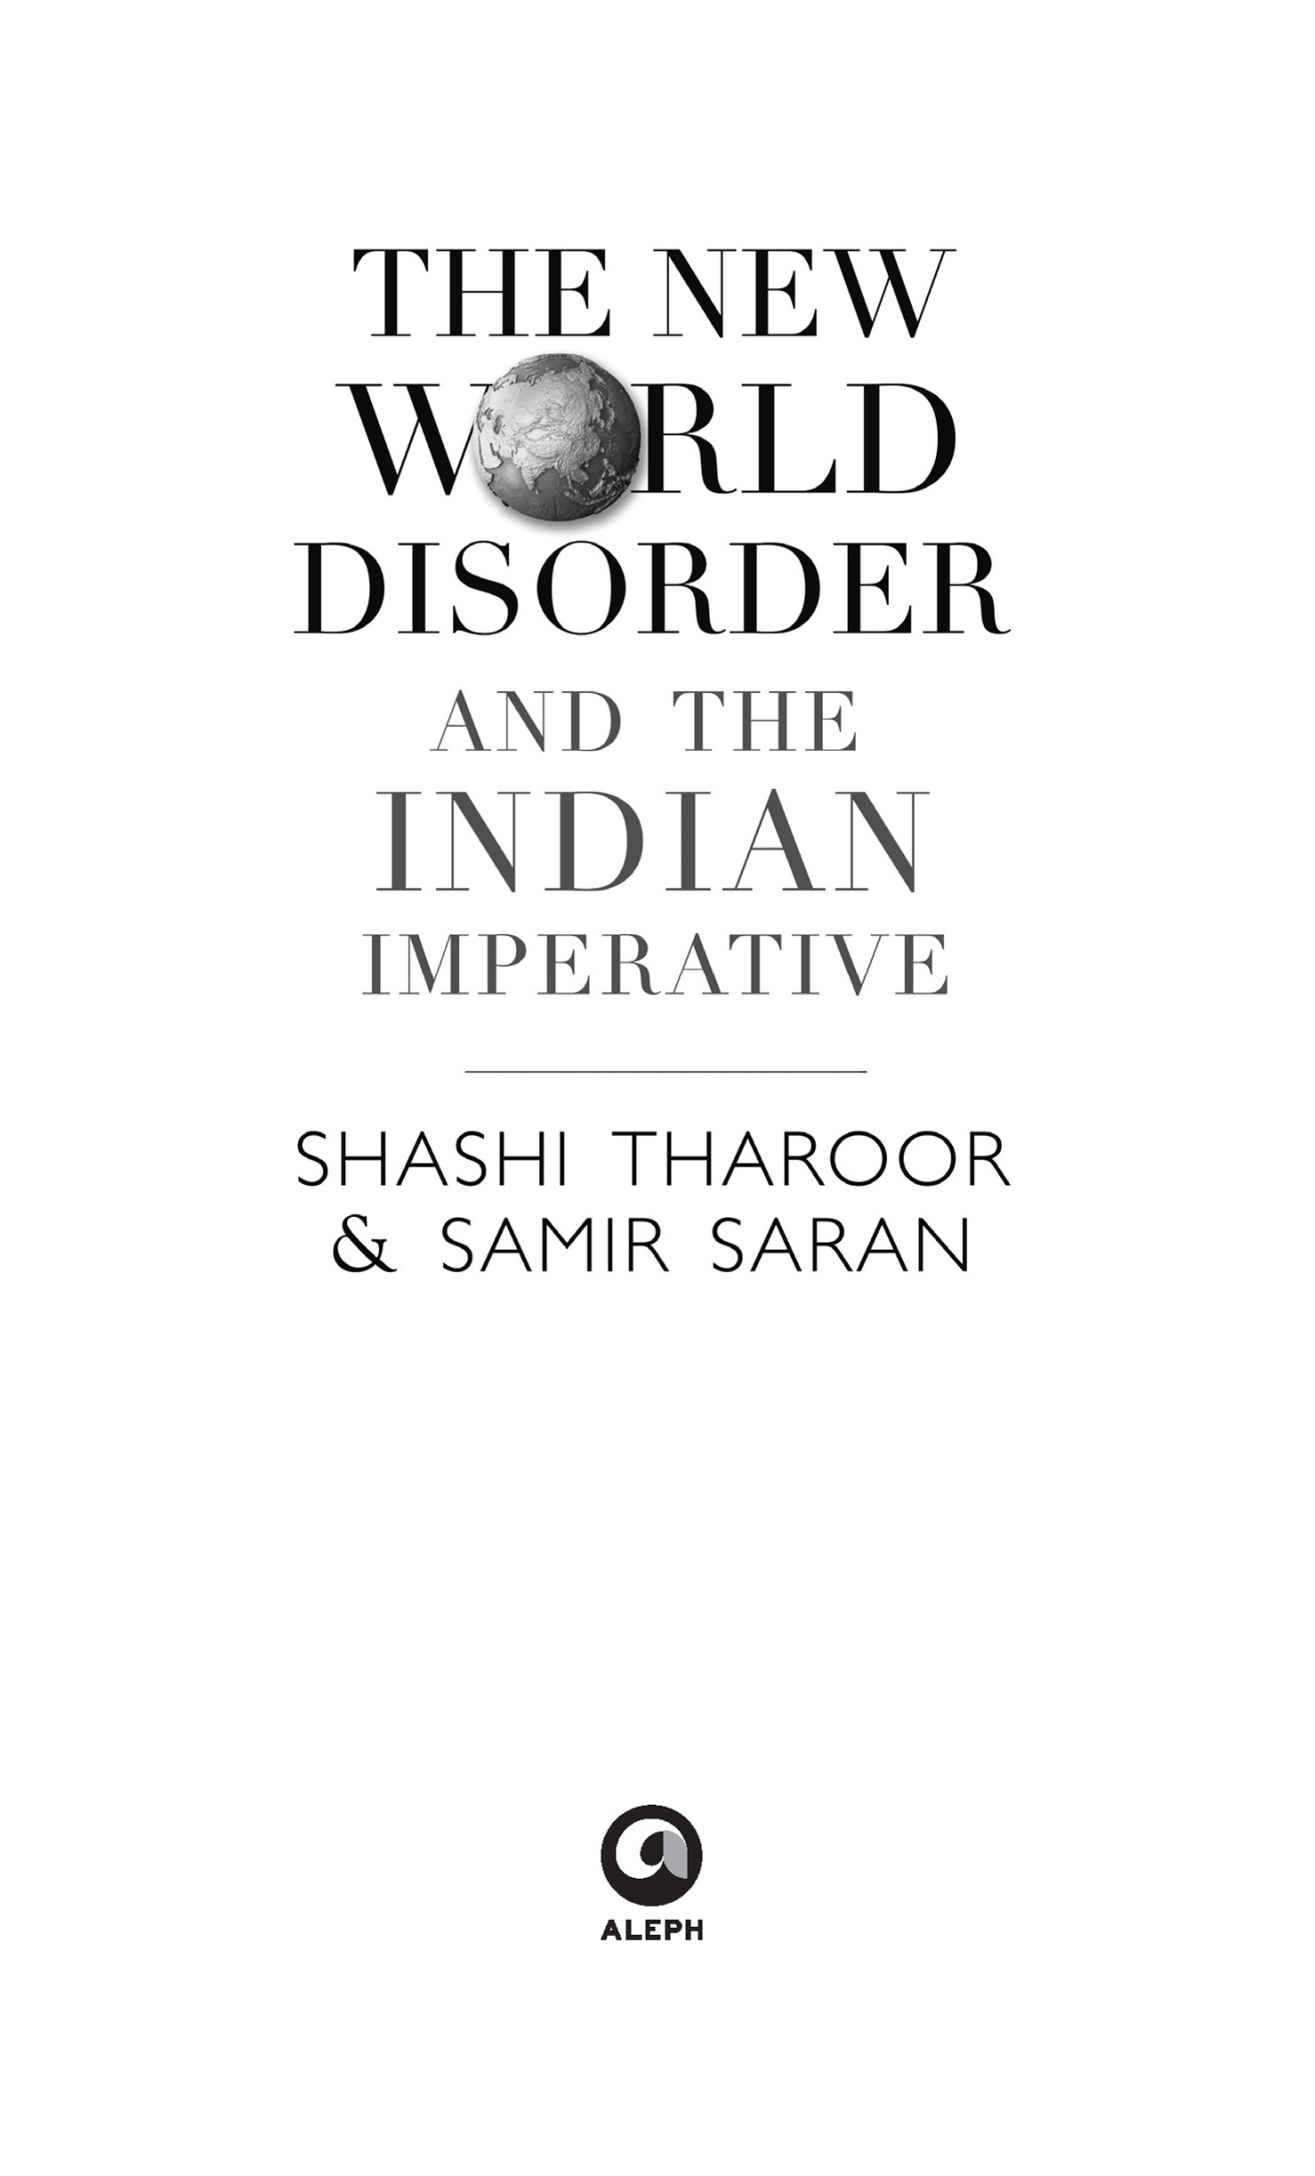 THE NEW WORLD DISORDER AND THE INDIAN IMPERATIVE - image 2